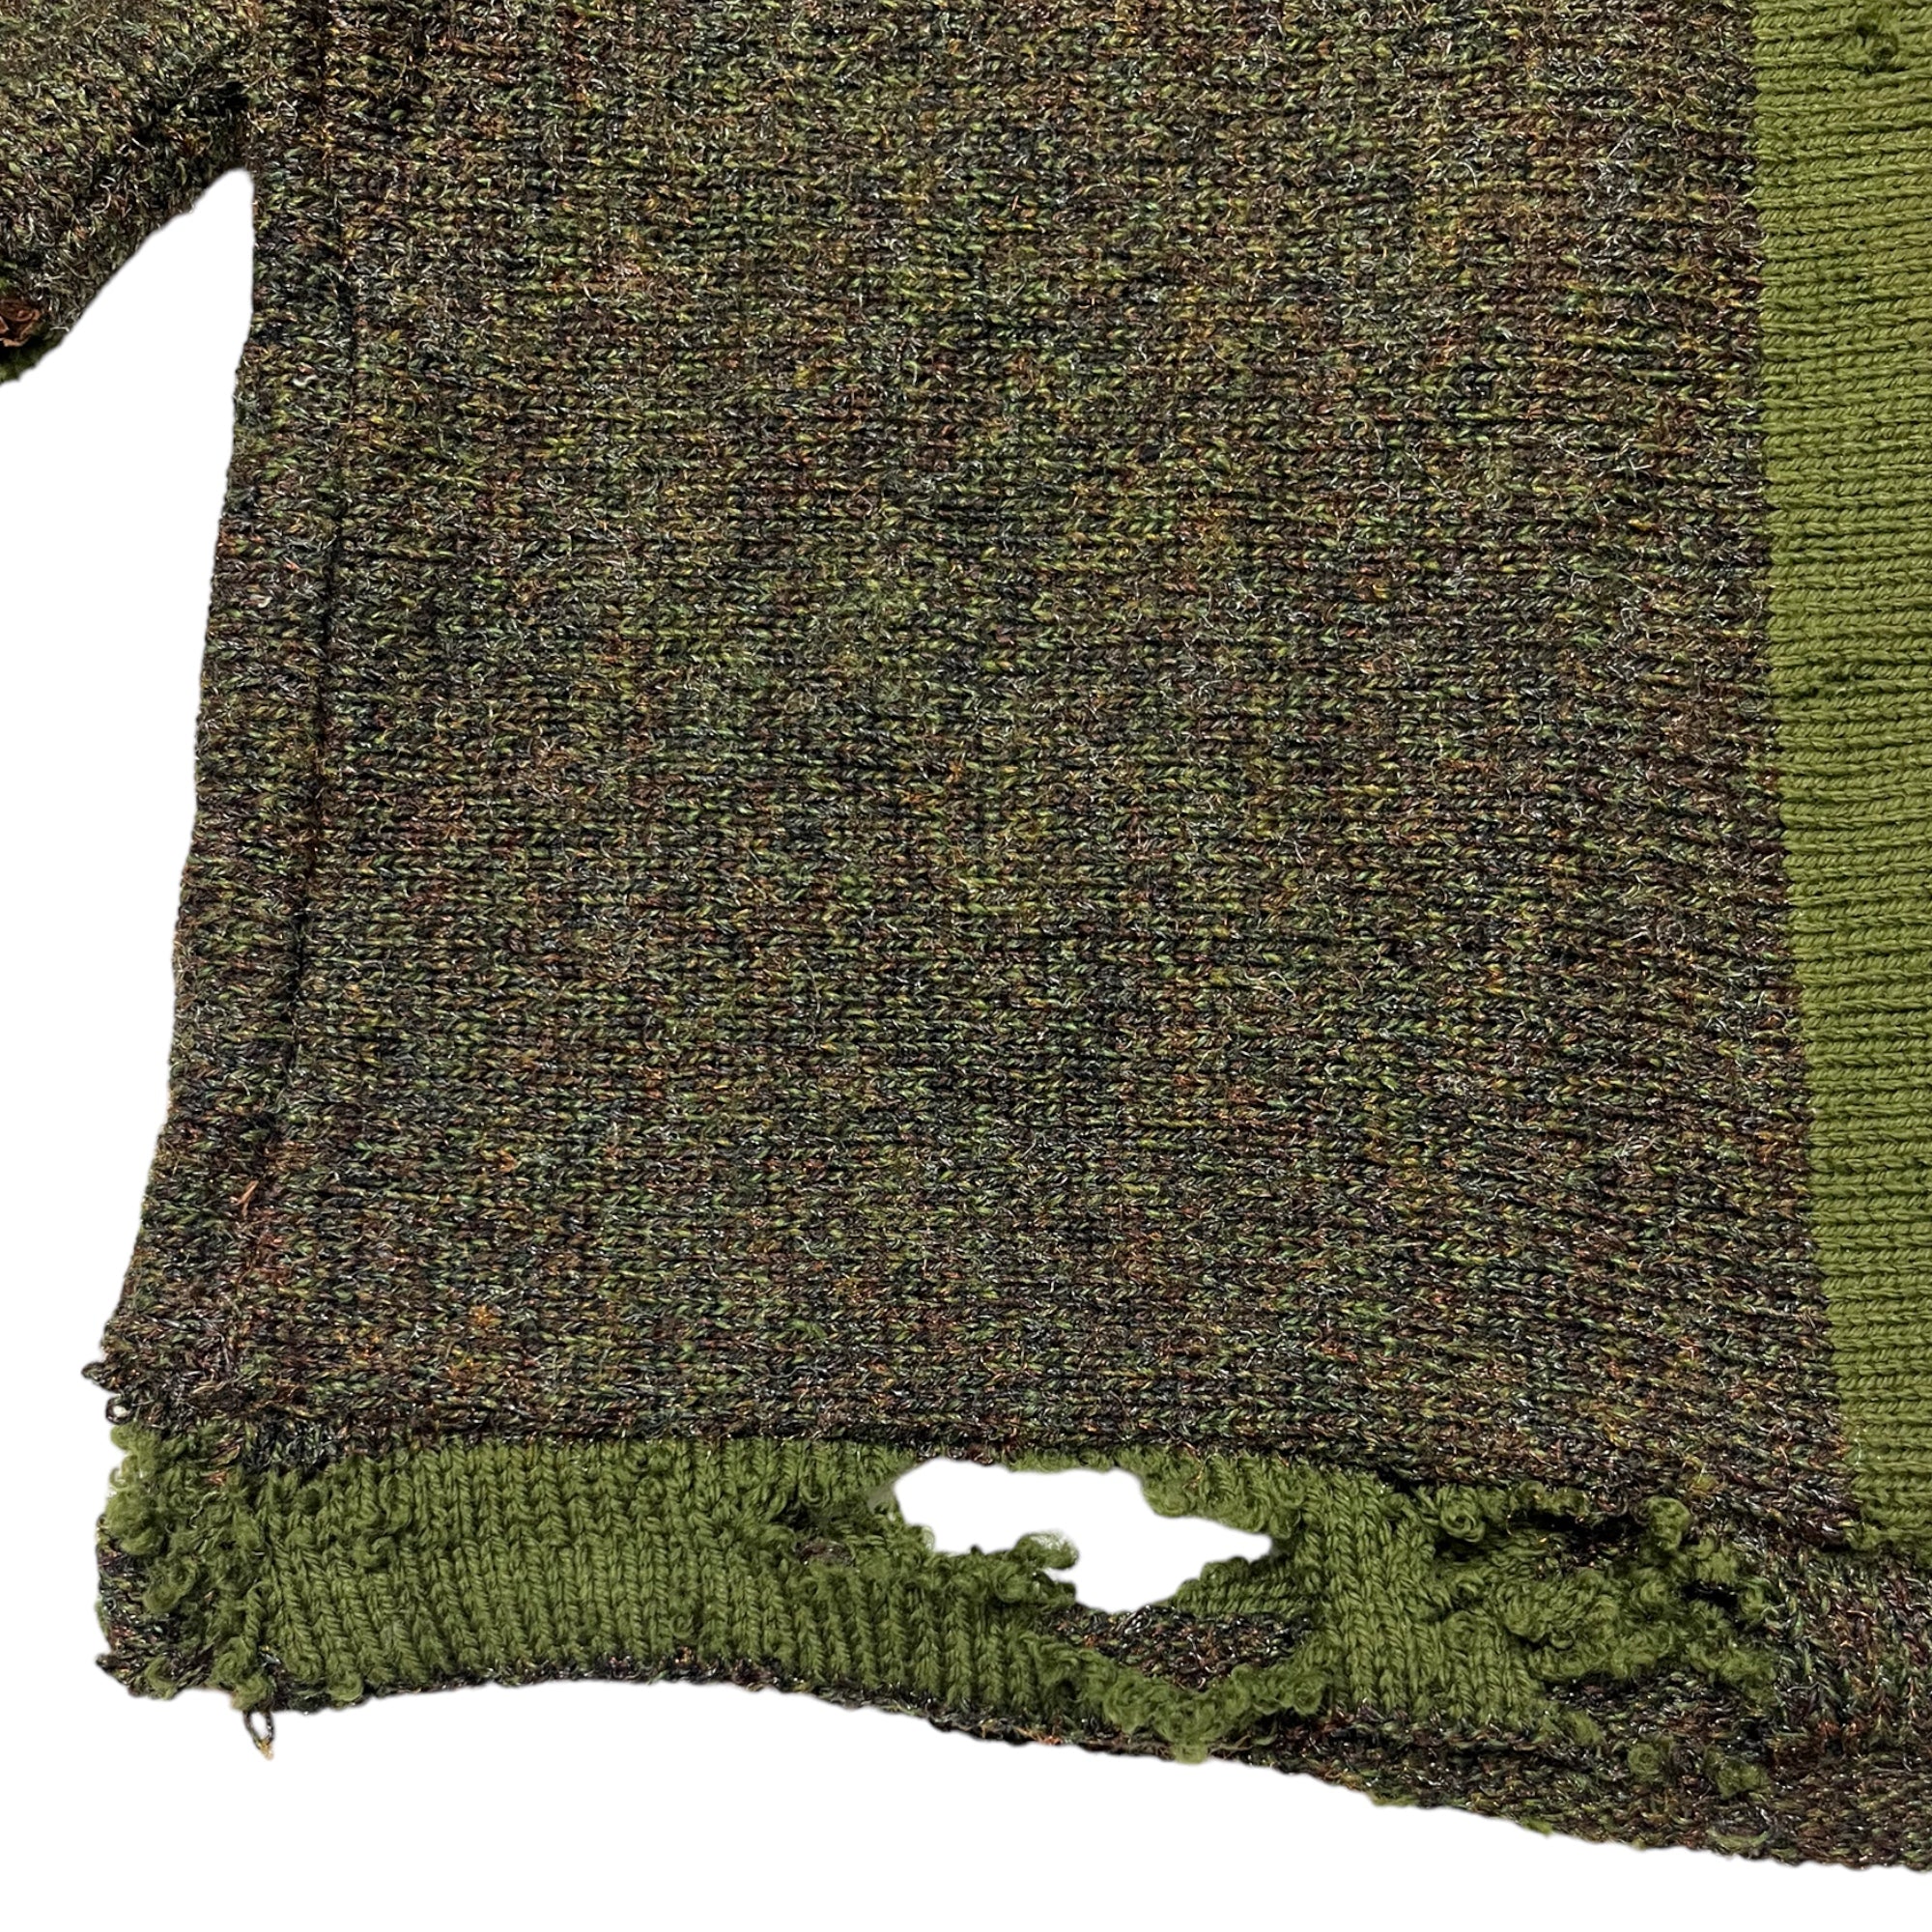 1930s Distressed French Quarter-Zip Farmer’s Knit Sweater - Olive/Brown - S/M